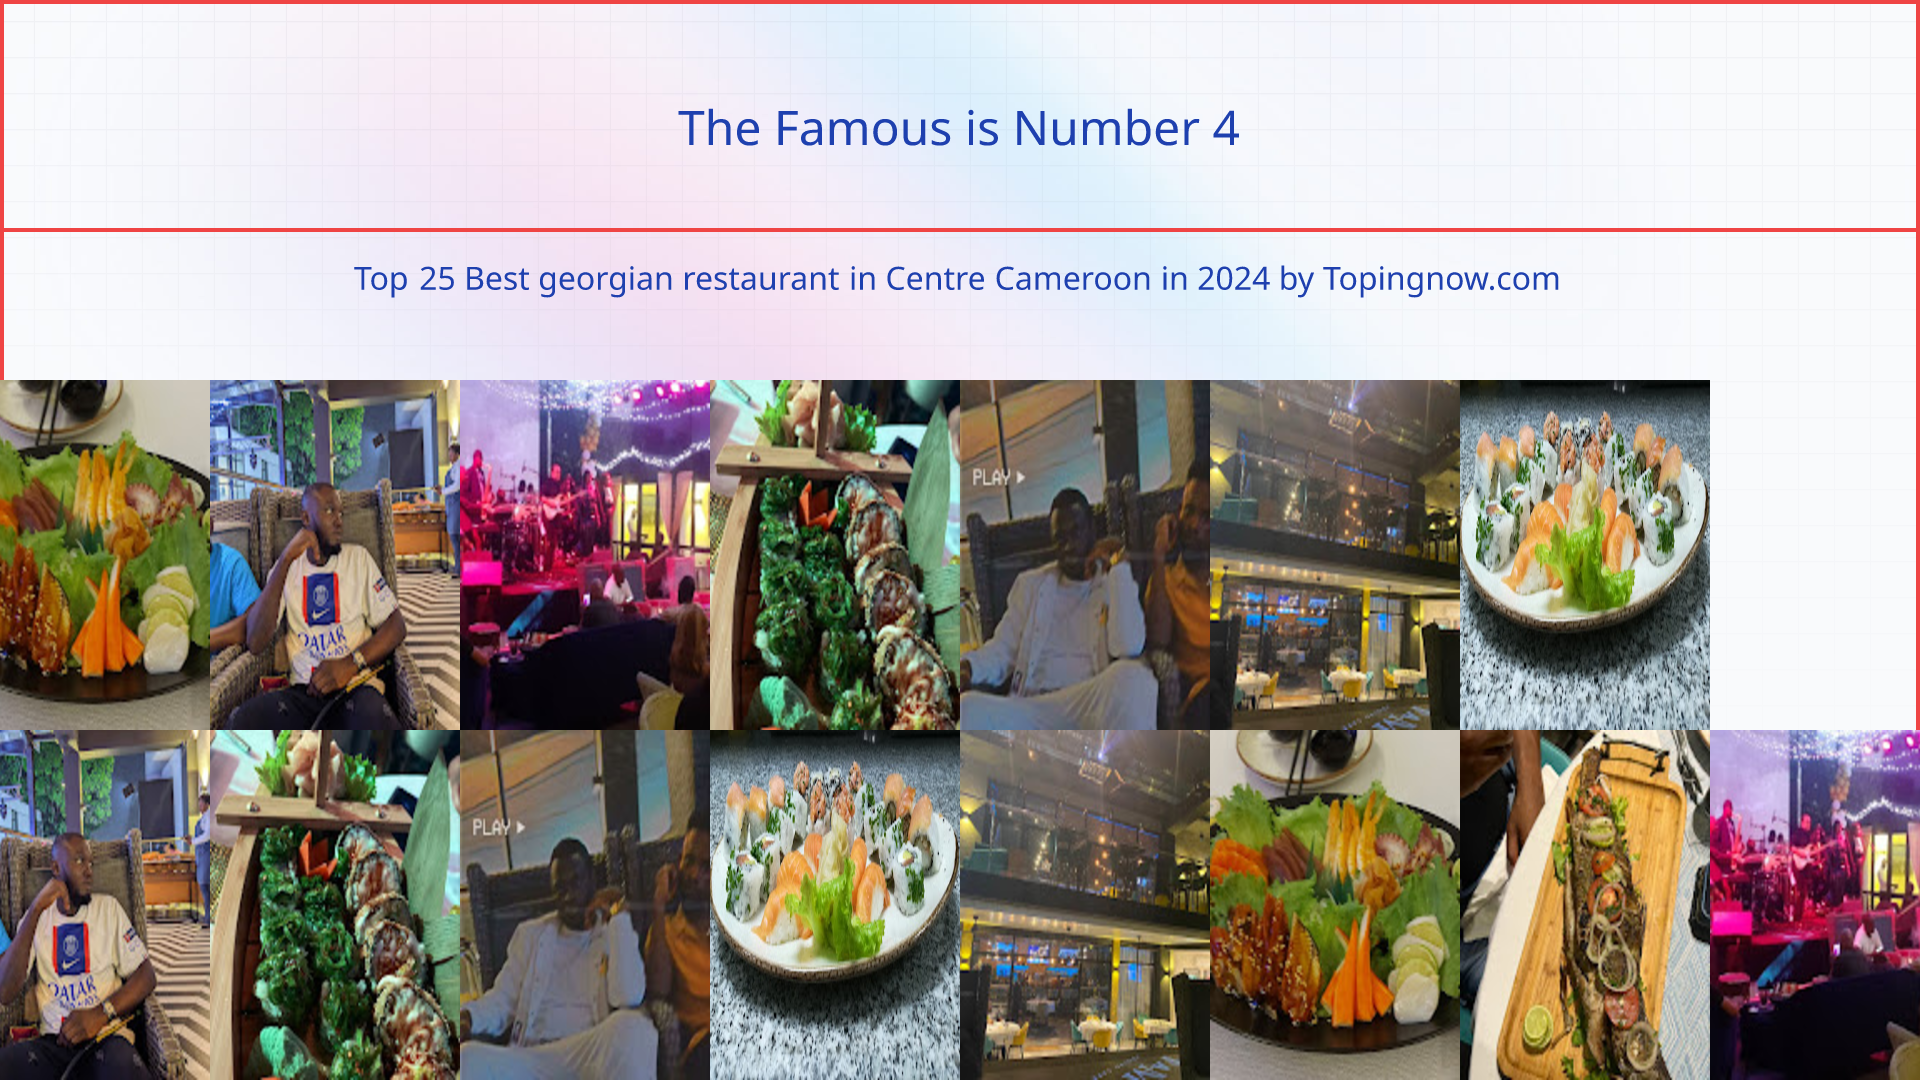 The Famous: Top 25 Best georgian restaurant in Centre Cameroon in 2024